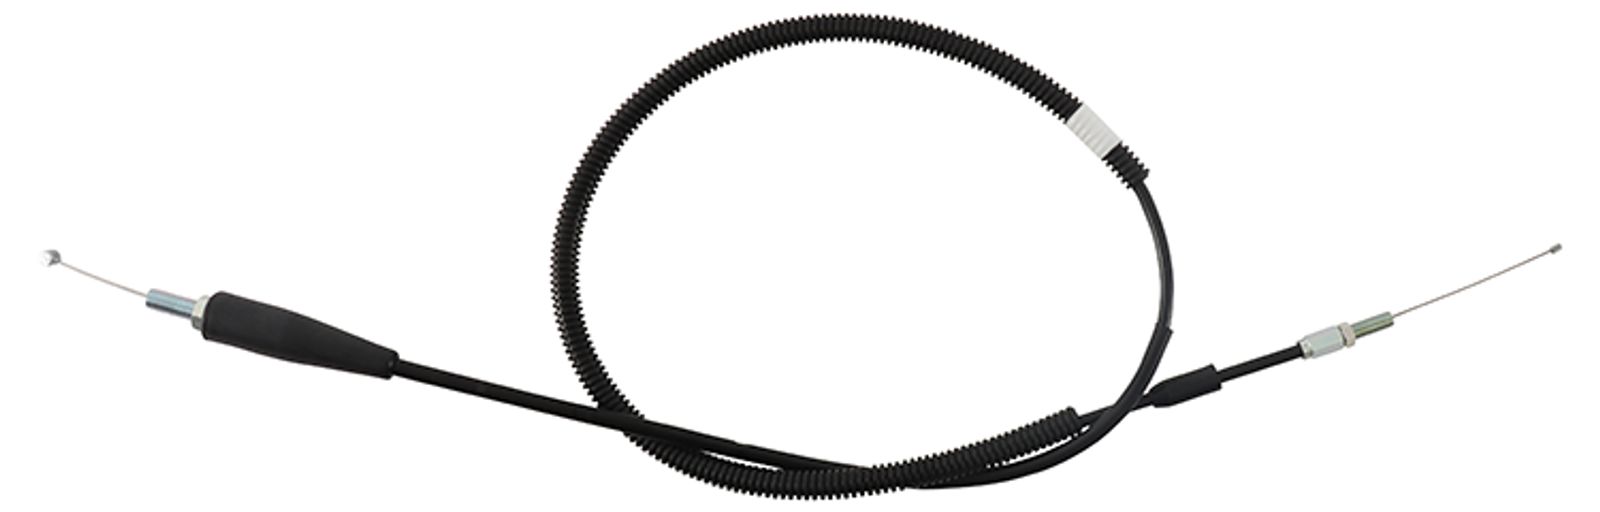 Wrp Throttle Cables - WRP451069 image